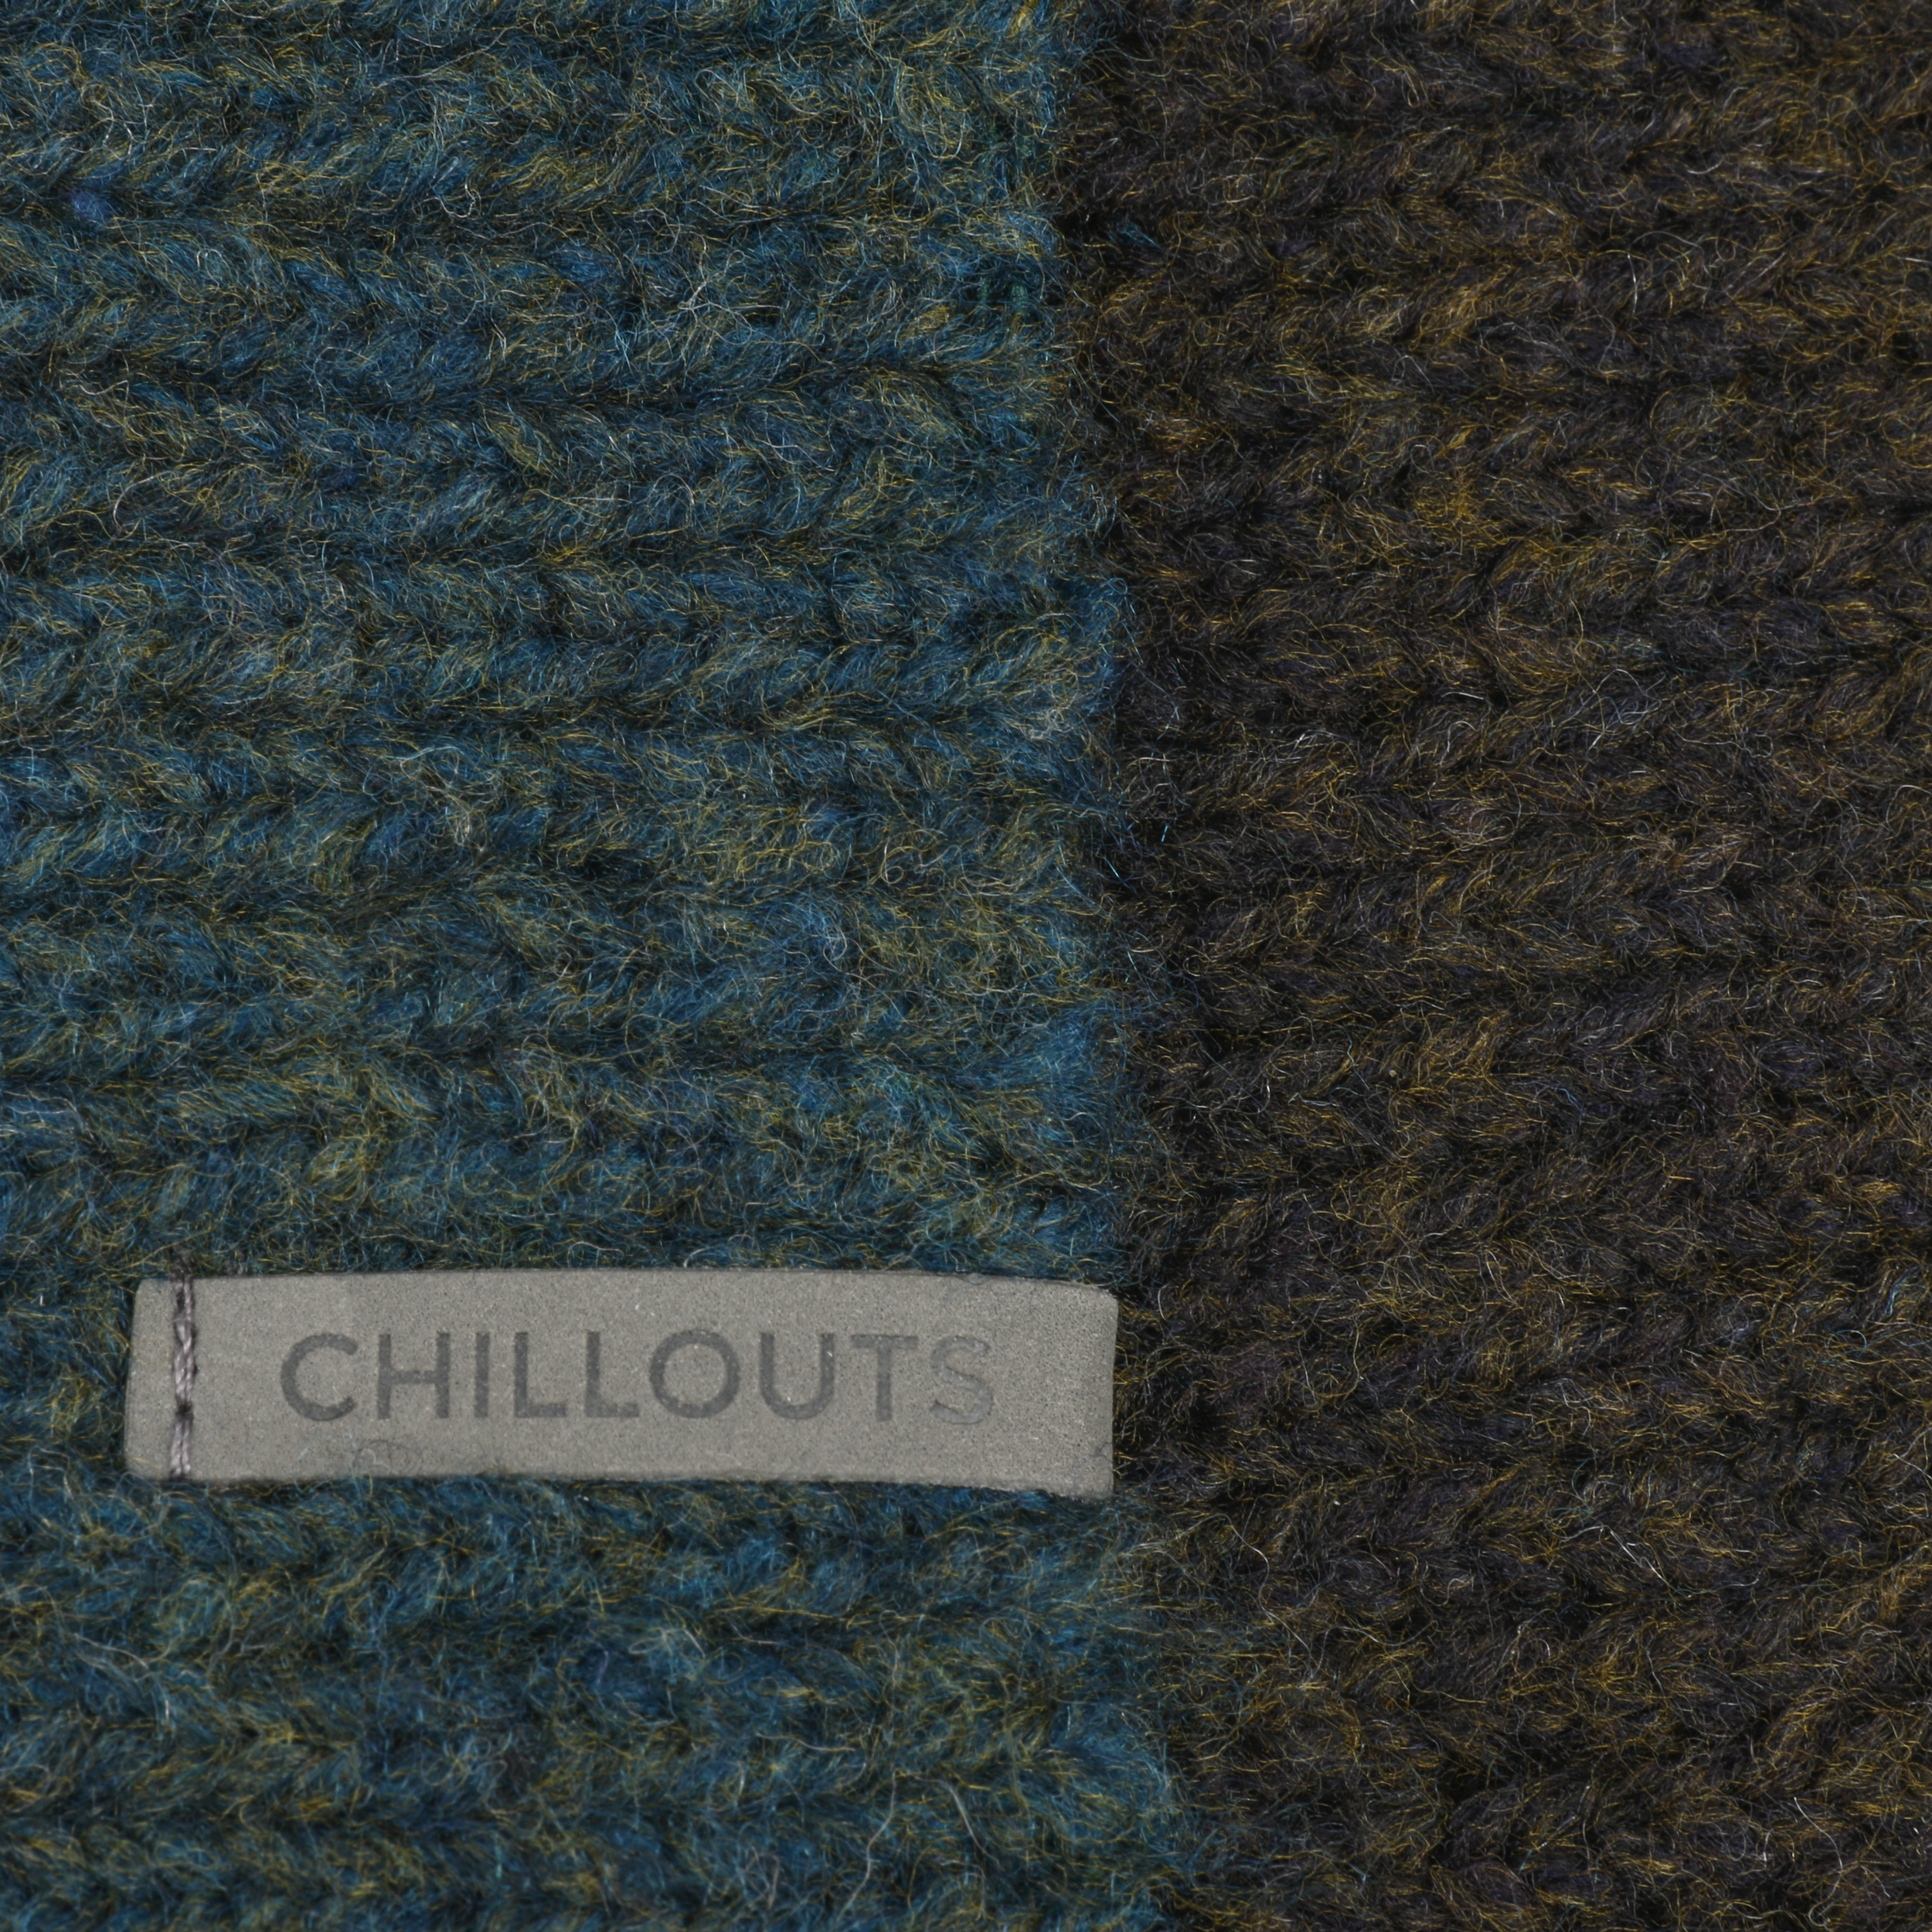 Beanie 24,99 Chillouts Fritz by € -